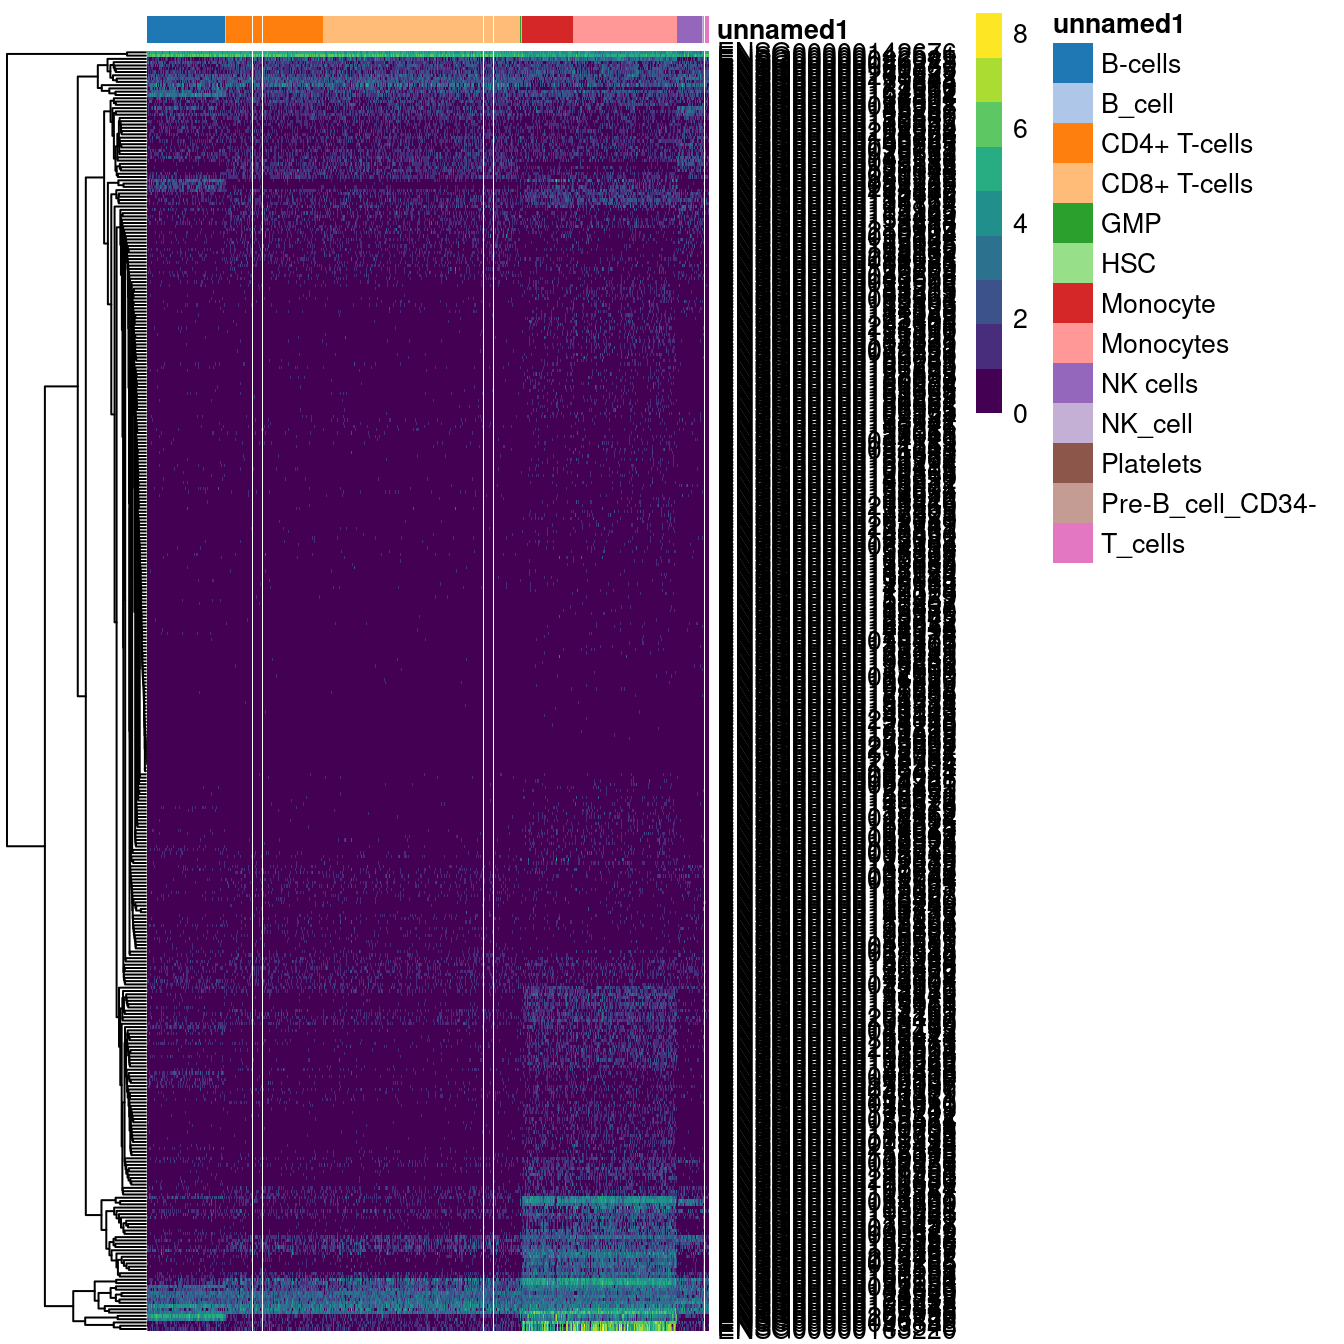 Heatmap of log-expression values in the PBMC dataset for all marker genes upregulated in monocytes in the Blueprint/ENCODE and Human Primary Cell Atlas reference datasets. Combined labels for each cell are shown at the top.